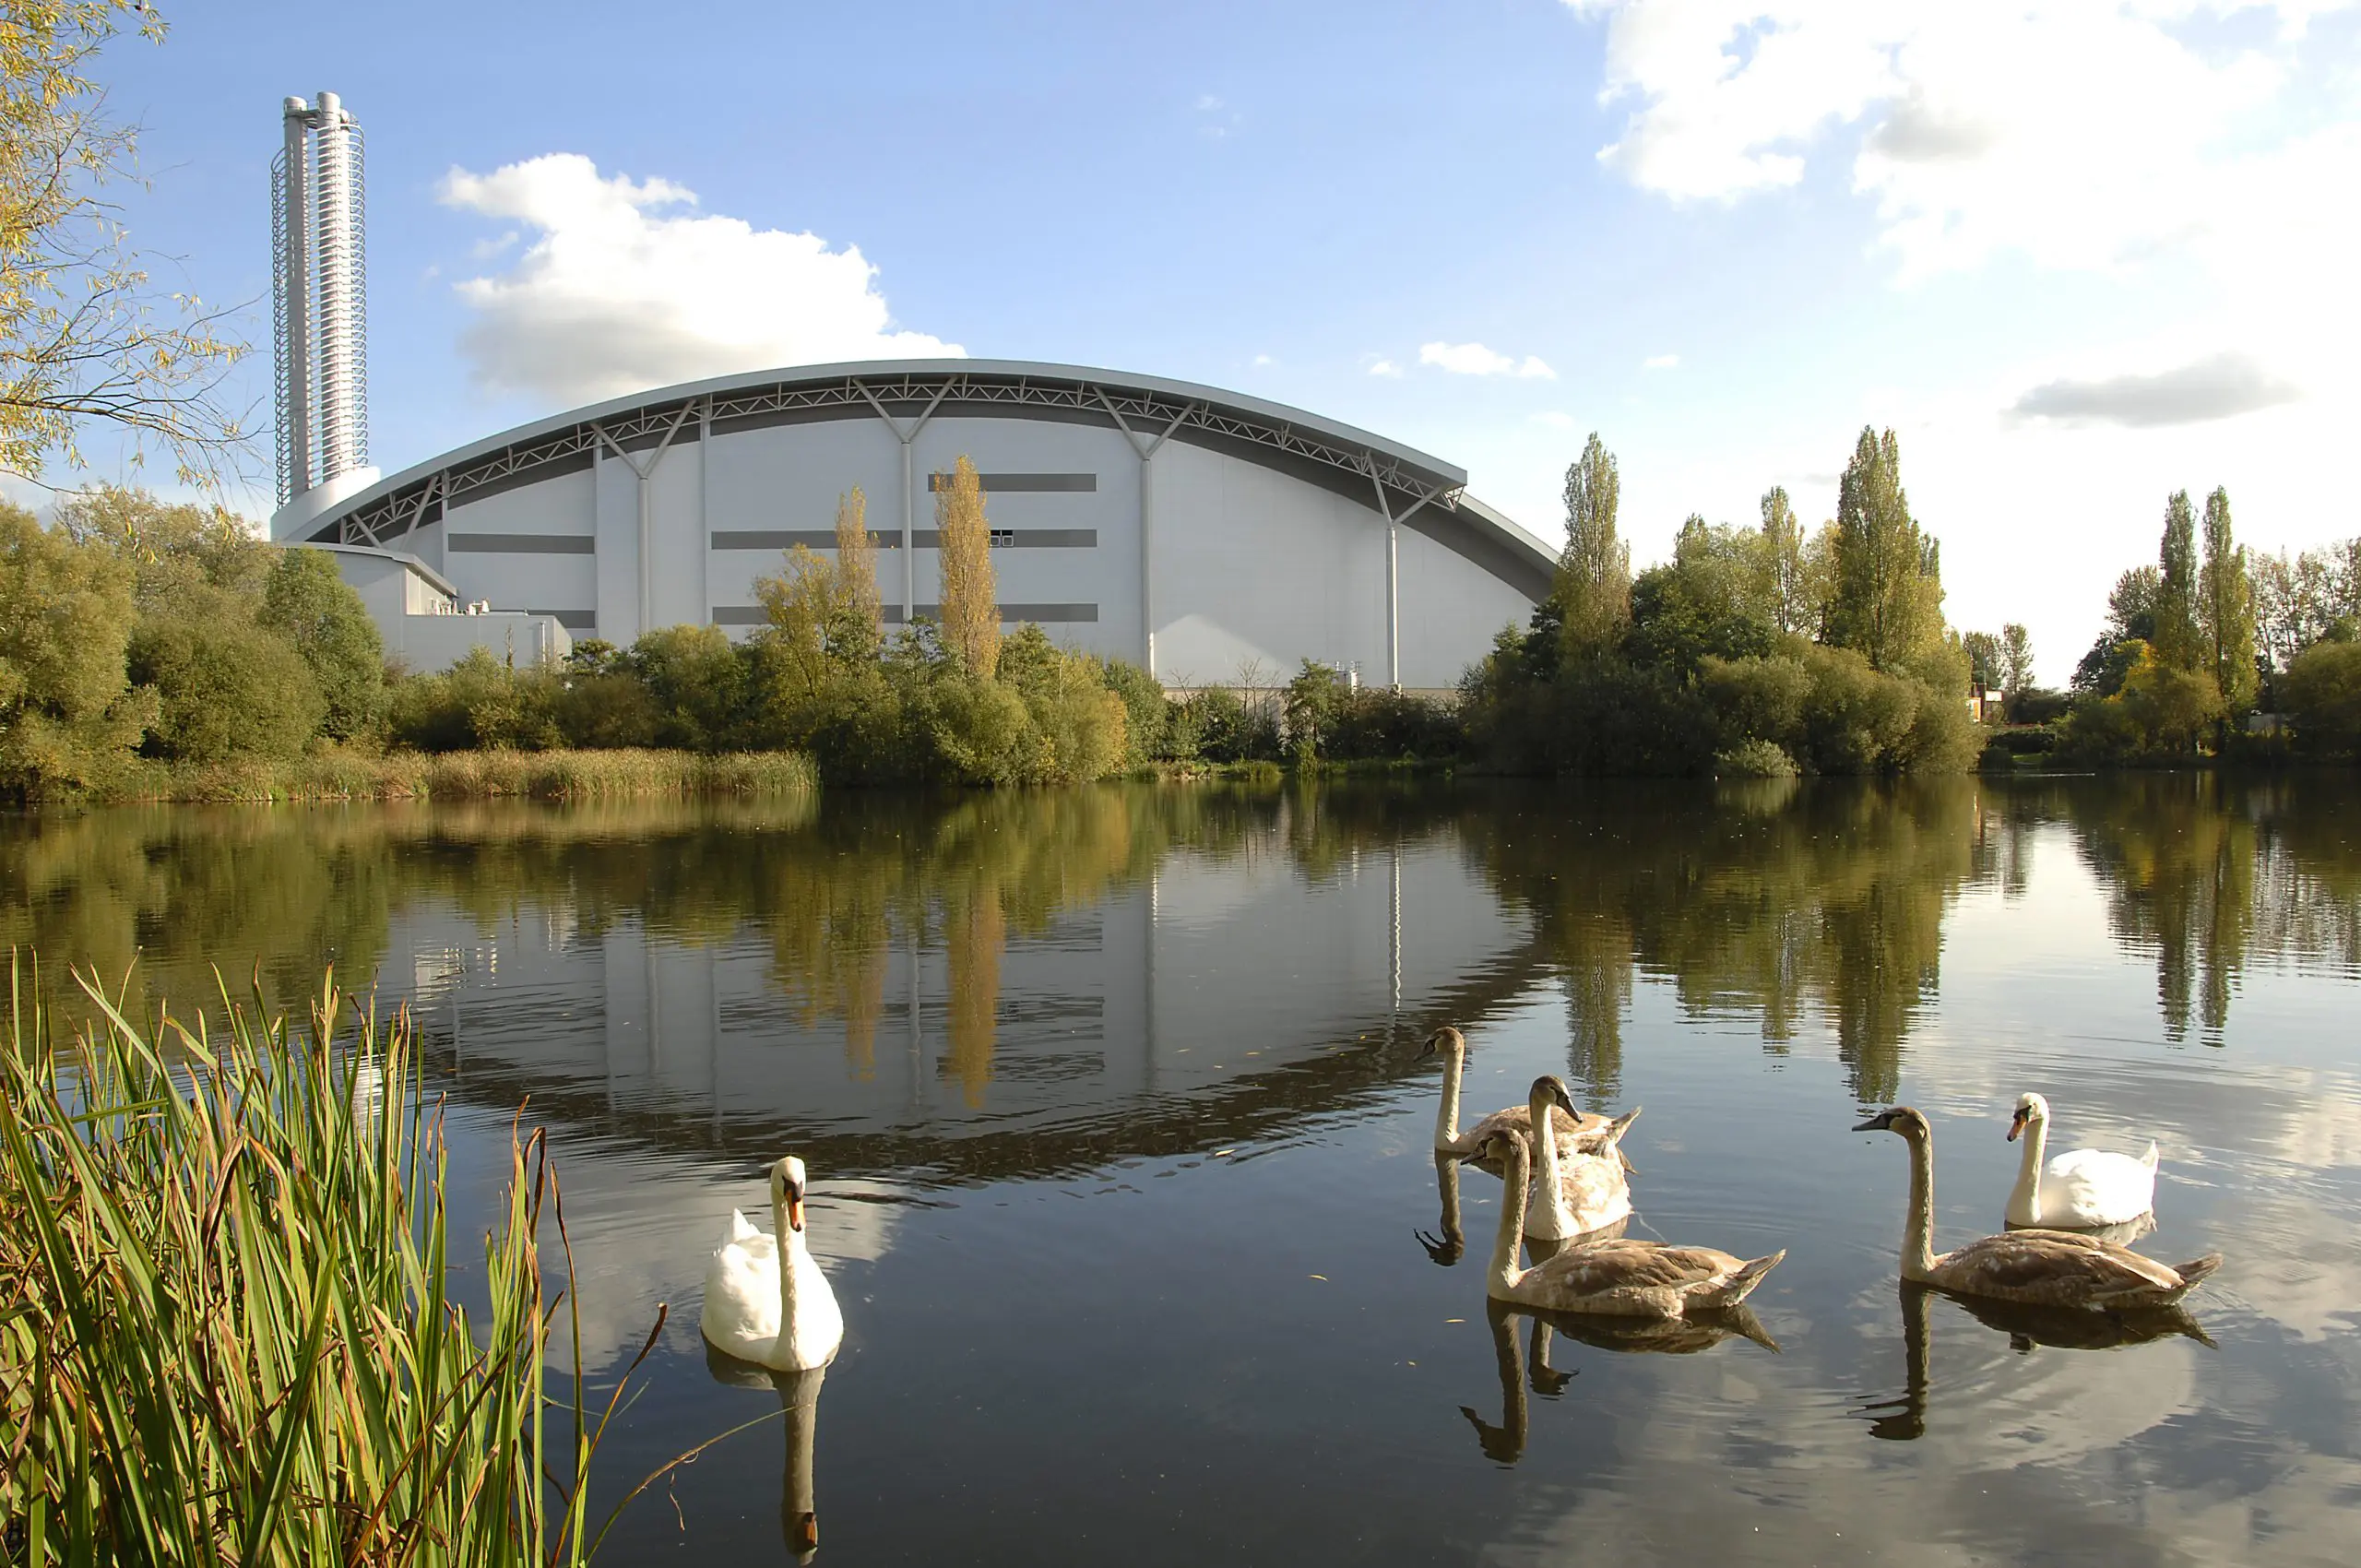 The Lakeside Energy from Waste facility in Colnbrook, Berkshire